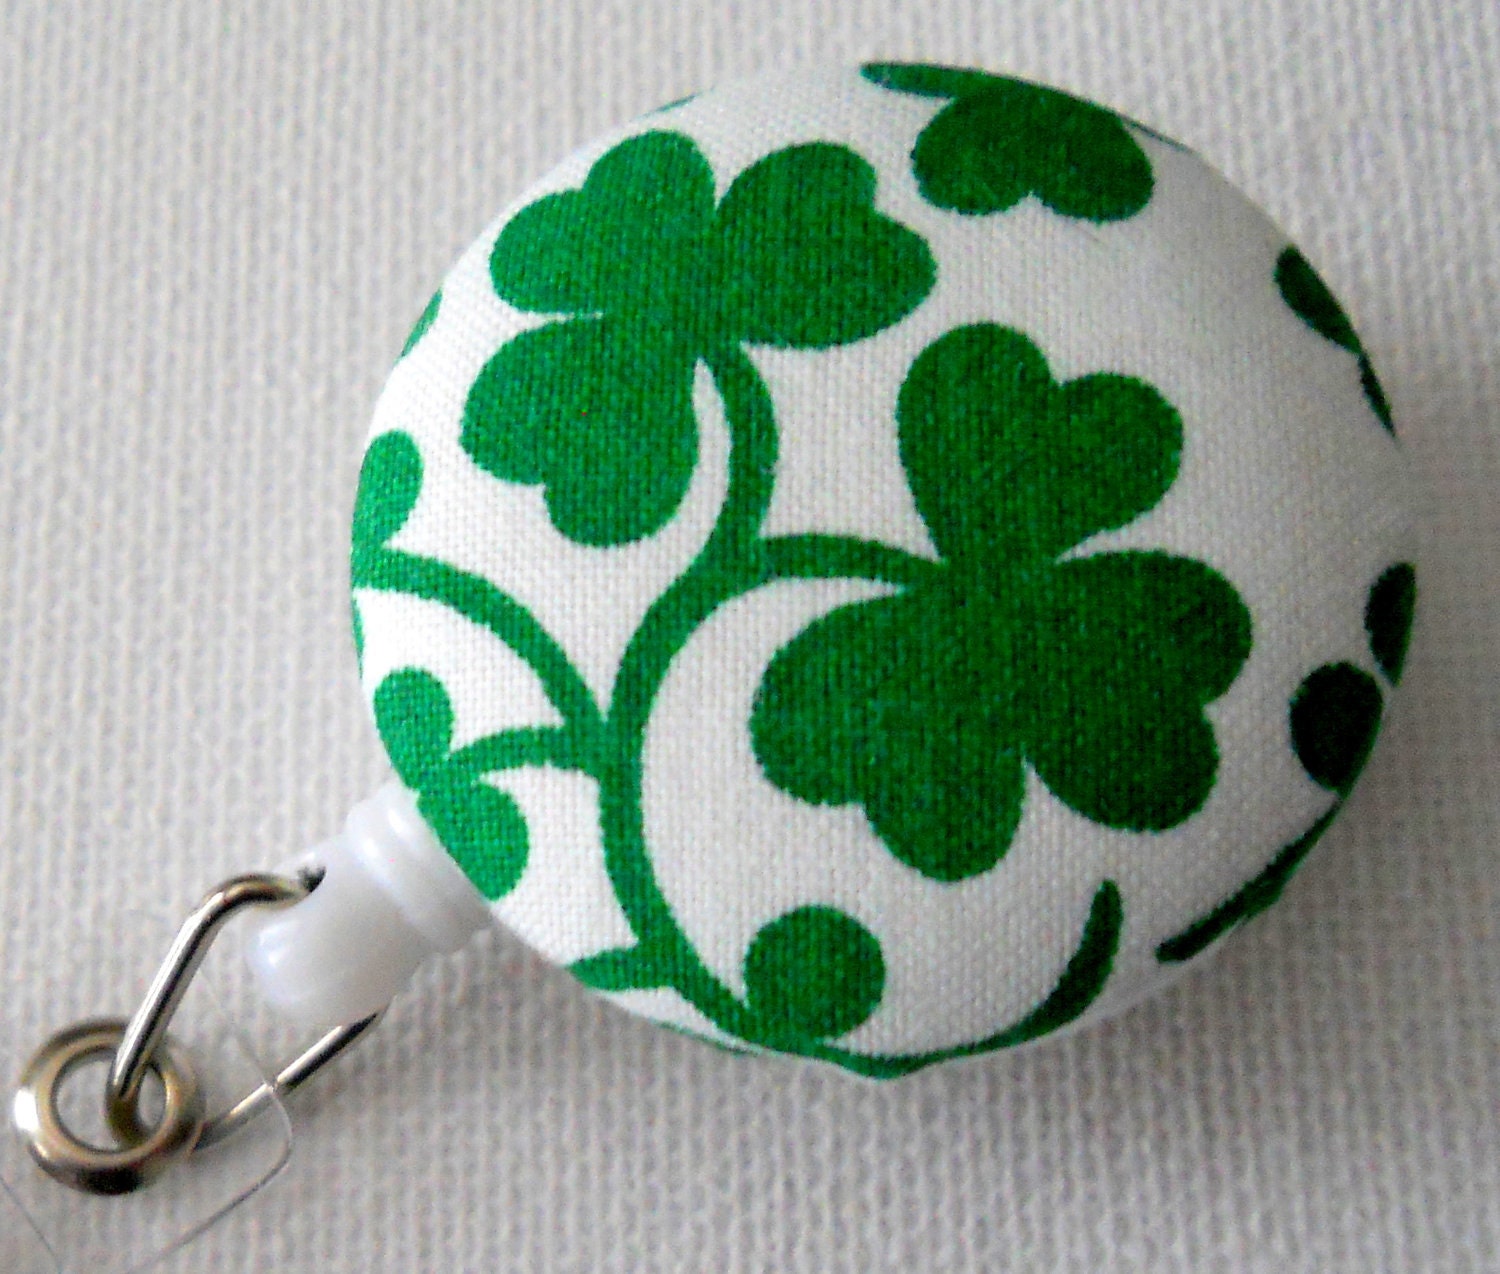 Retractable ID Badge Holder - ID Badge Reel Holder for St. Patrick's Day Clover Shamrock Kelly Green (Retractable)